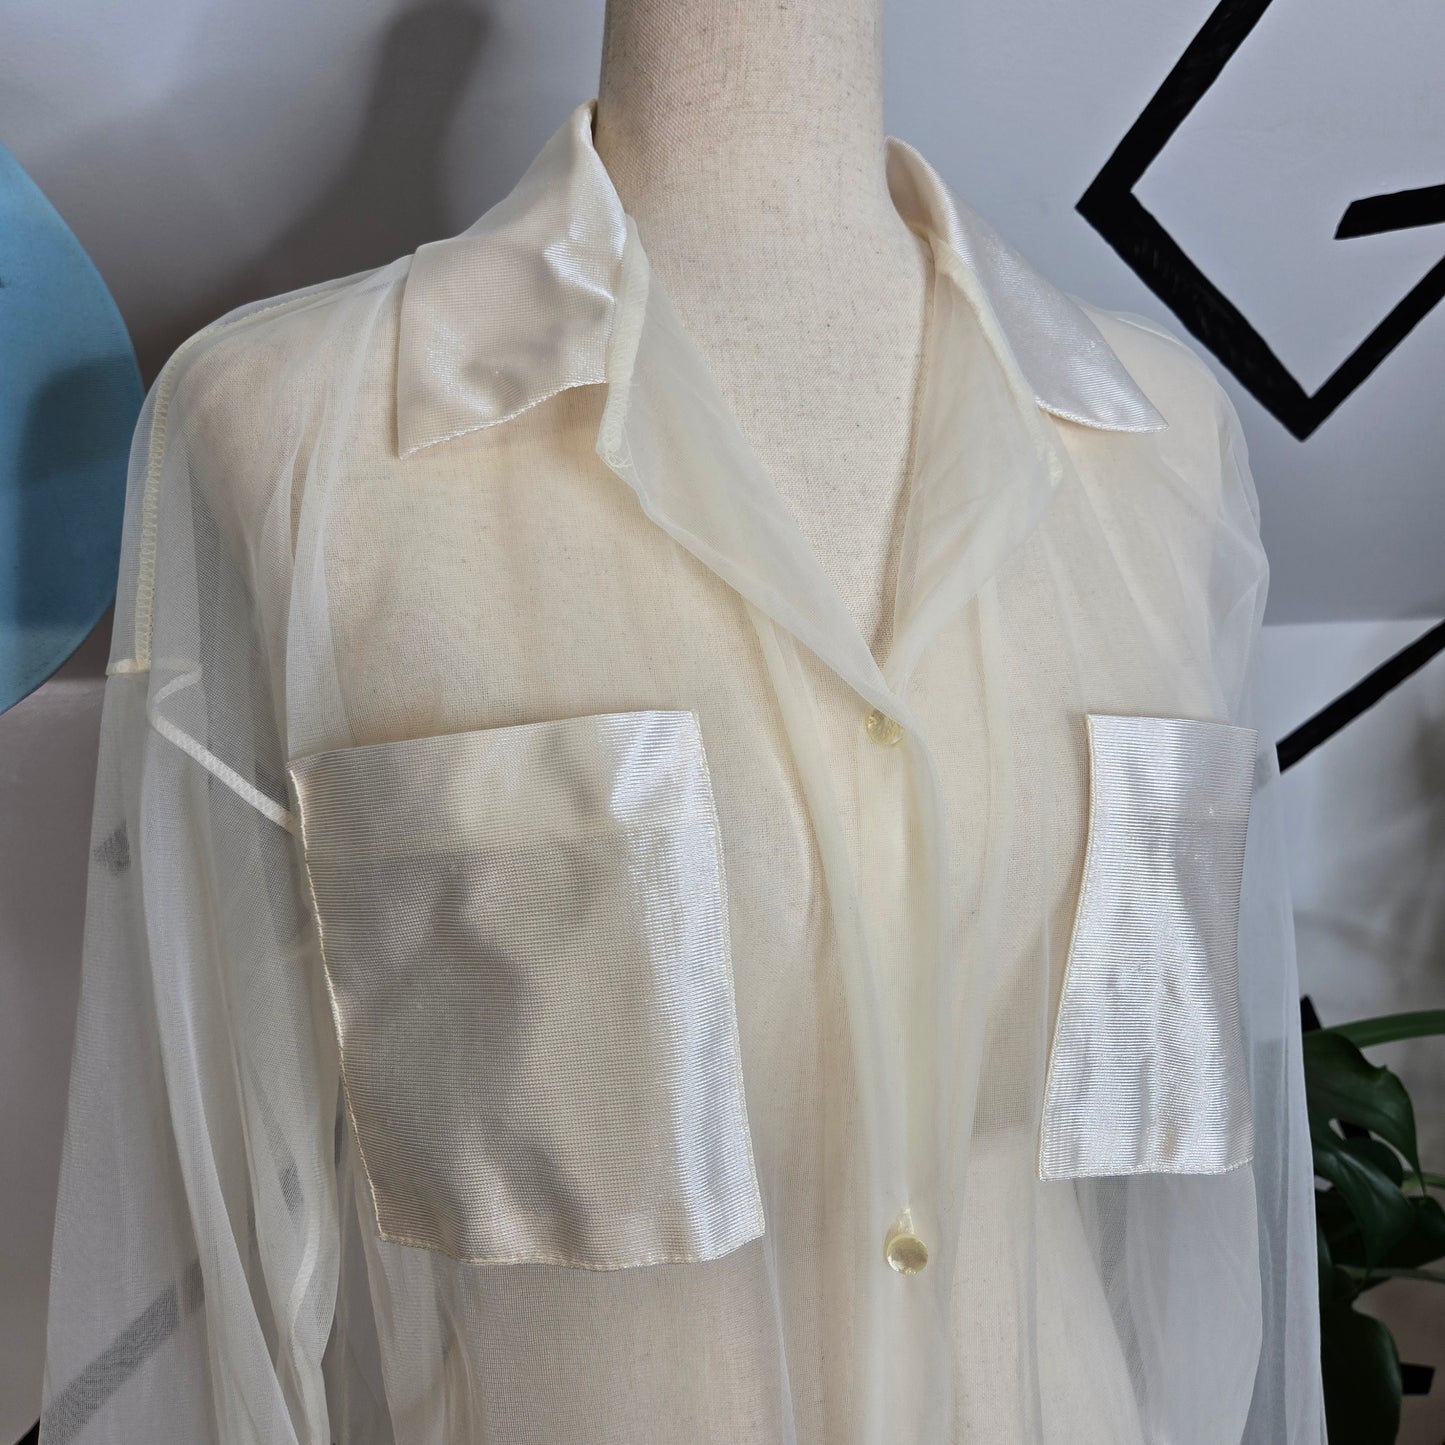 Nite Images Vintage 60s Super Sheer White Button Down Top - large